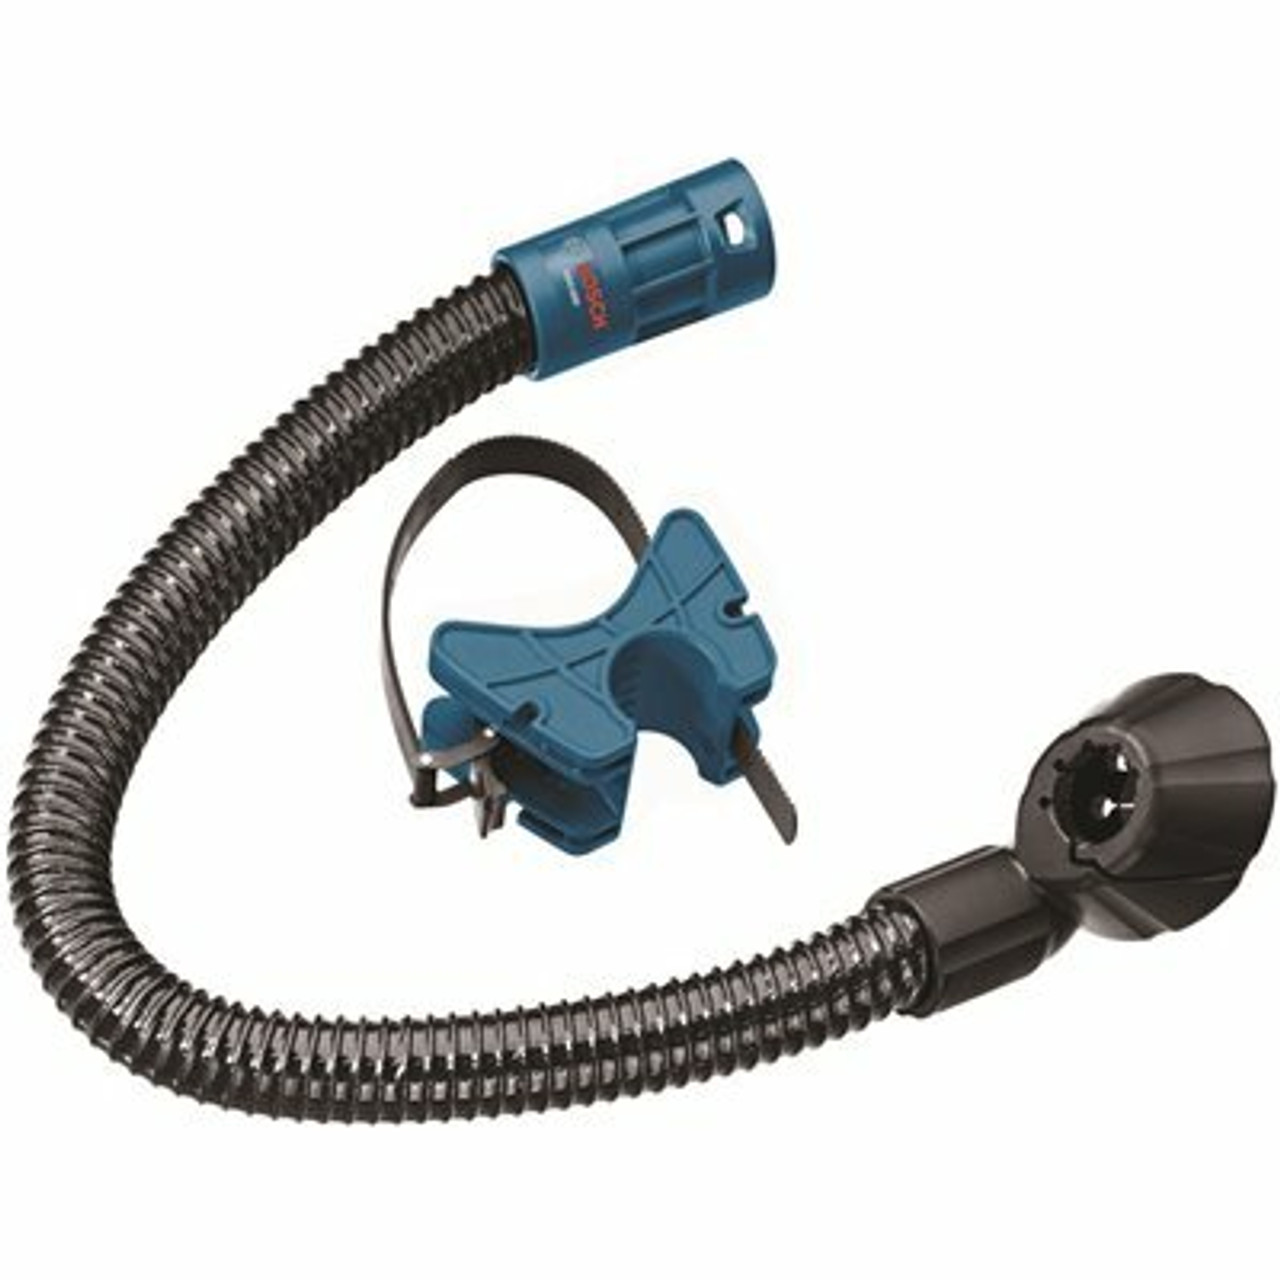 Bosch 1-1/8 In. Hex Dust Collection Attachment For Breaker Hammers